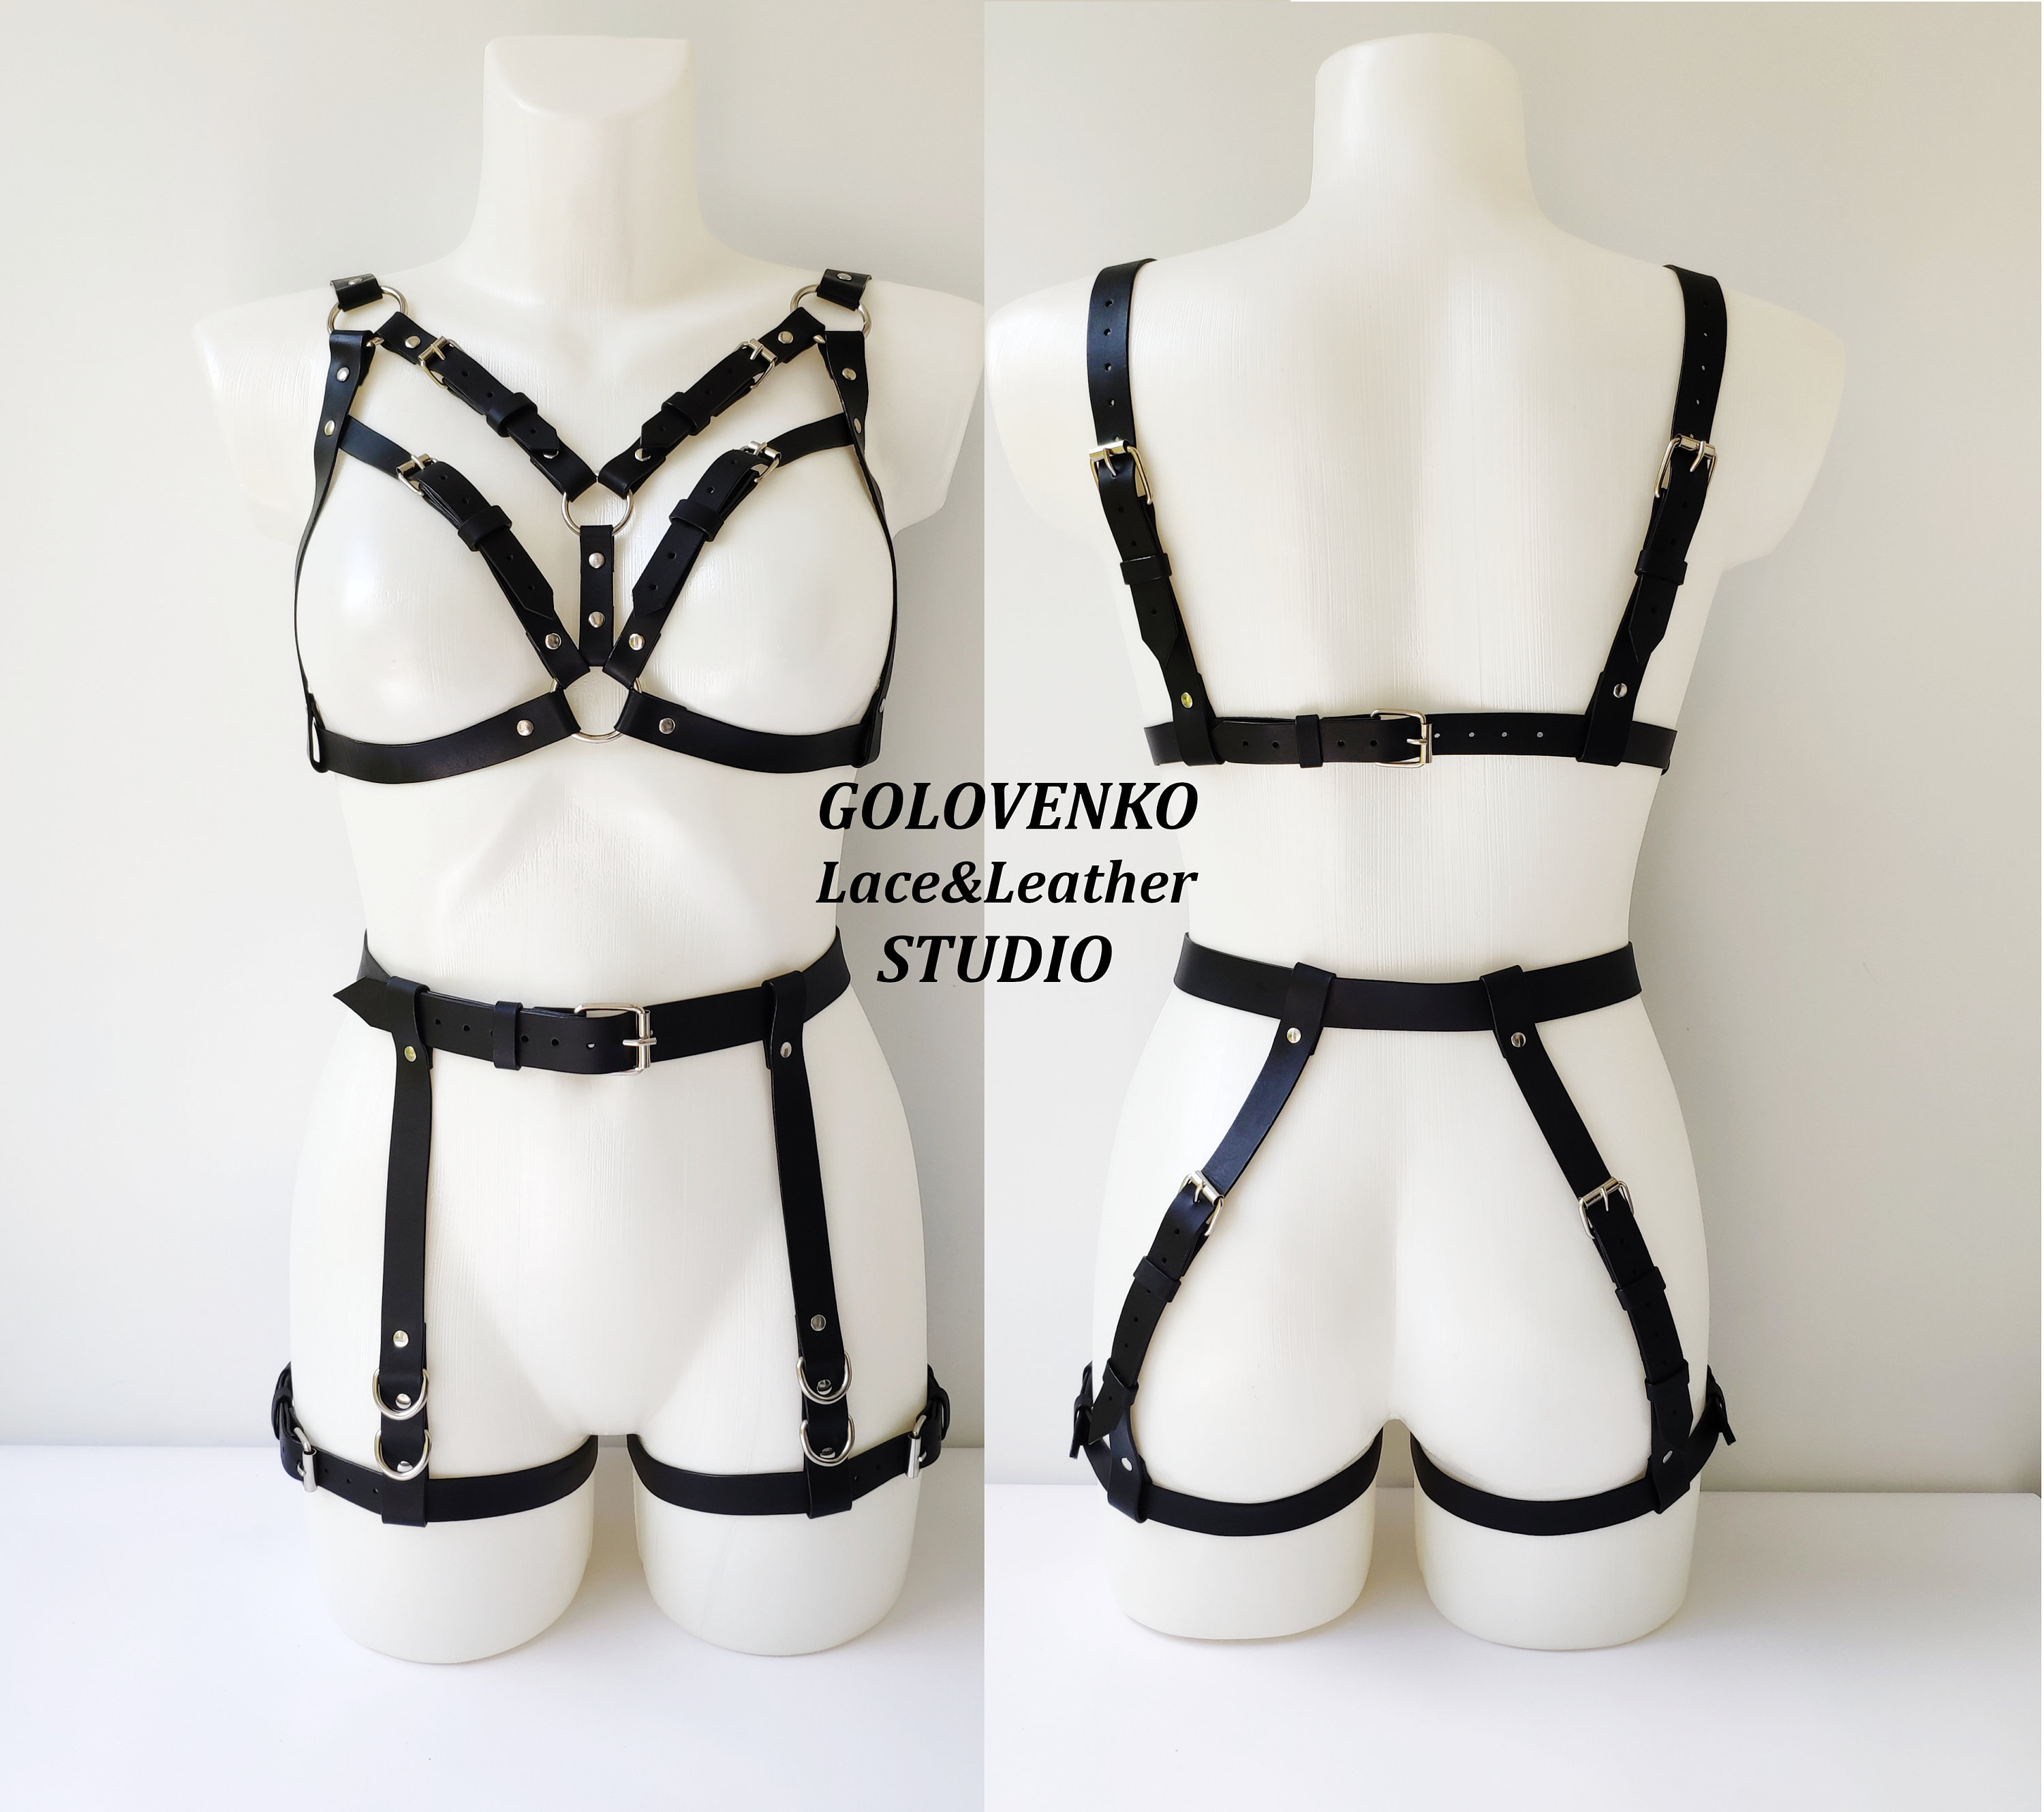 Genuine Leather Cage Bra, Bdsm Chest Harness, Women Bondage Open Bra,  Leather Cupless Bra, Leather Lingerie, Black Leather Breast Harness -   Canada